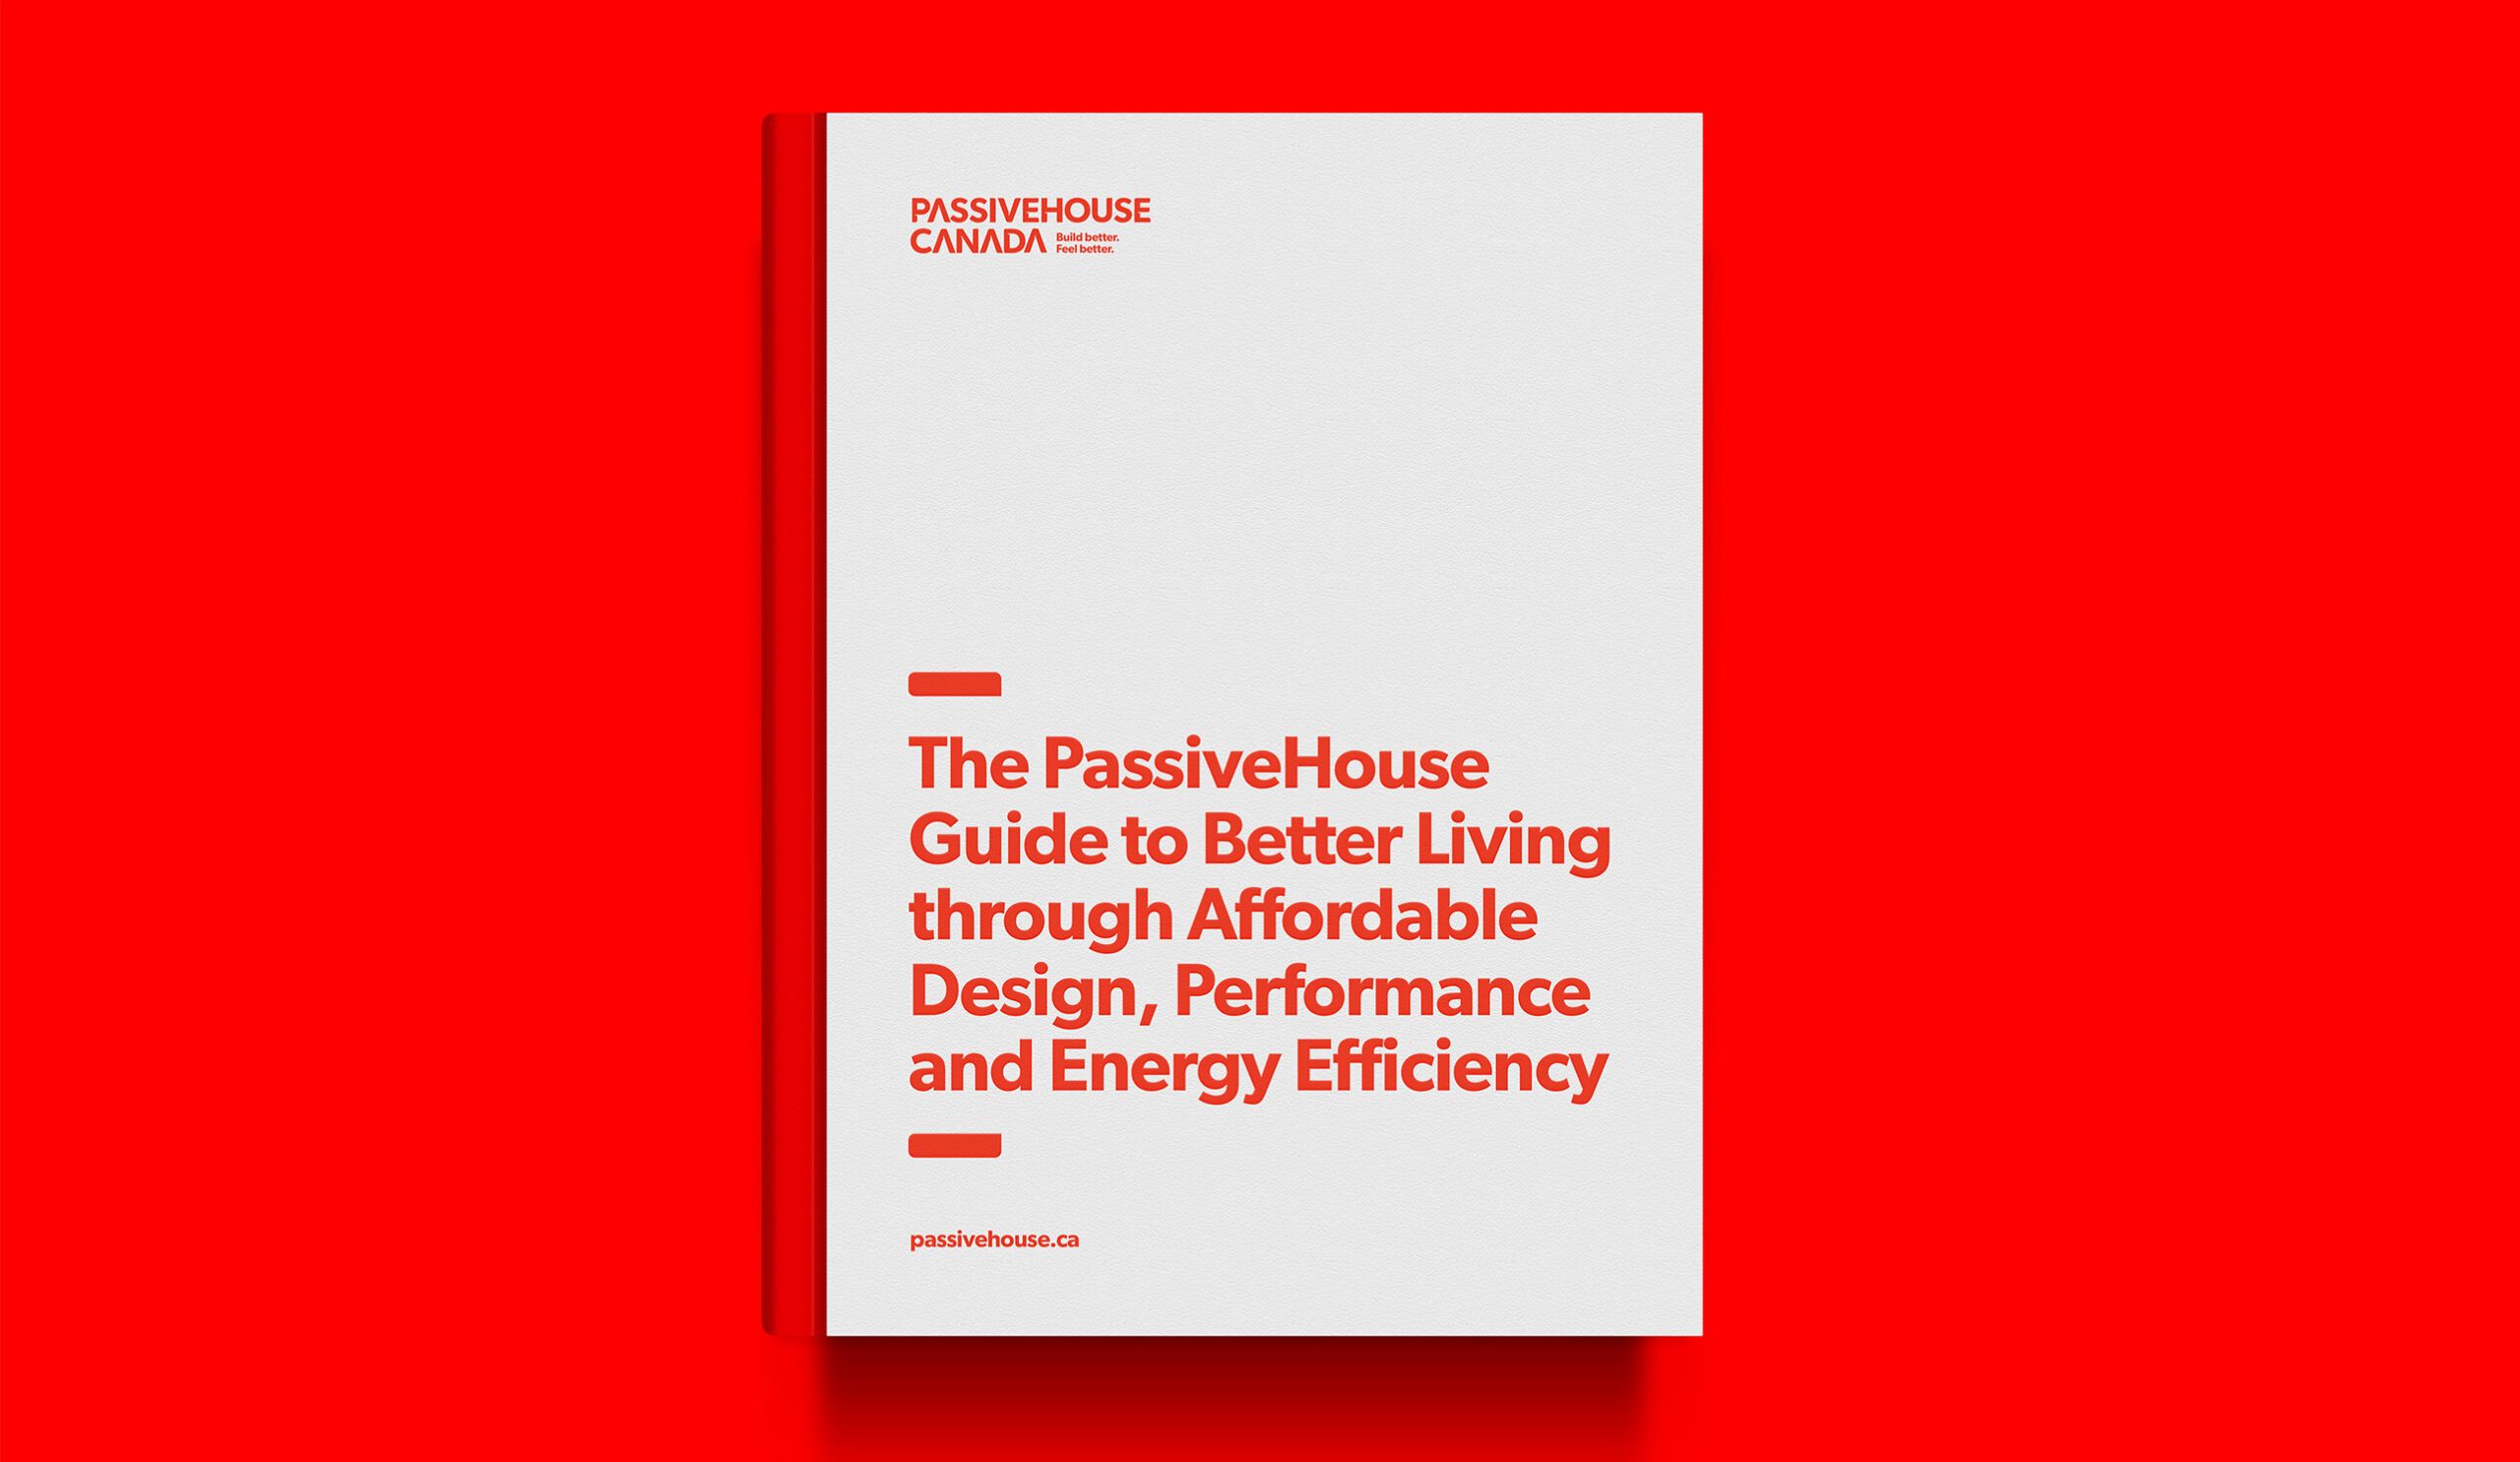 A white book with red text that says "The PassiveHouse Guide to Better Living through Affordable Design, Performance and Energy Efficiency"